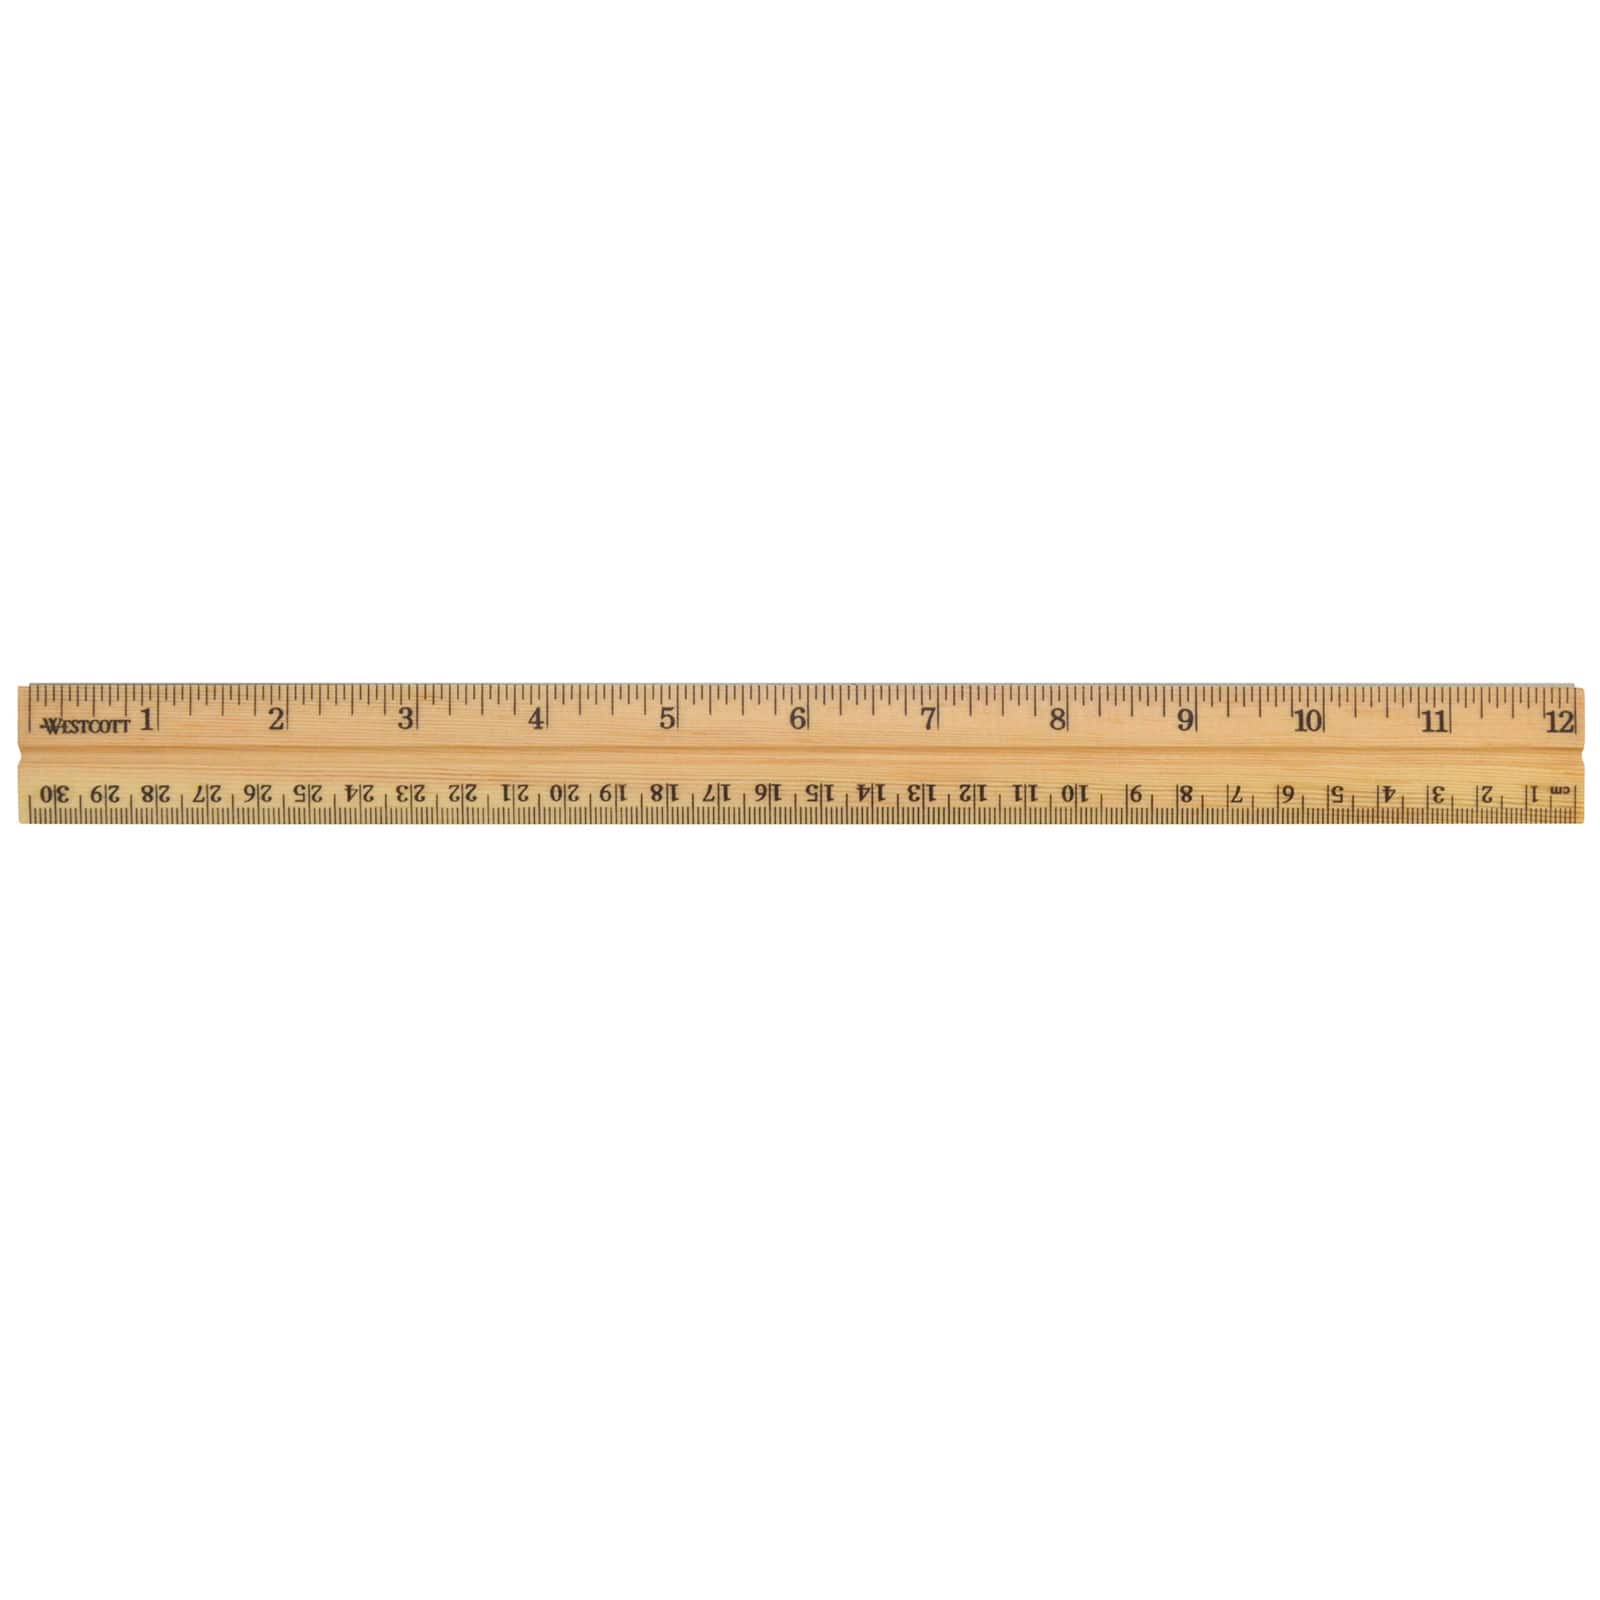 Westcott 12 Dual-Sided Inches/Metric Wood Ruler 12 Length 1, 45% OFF